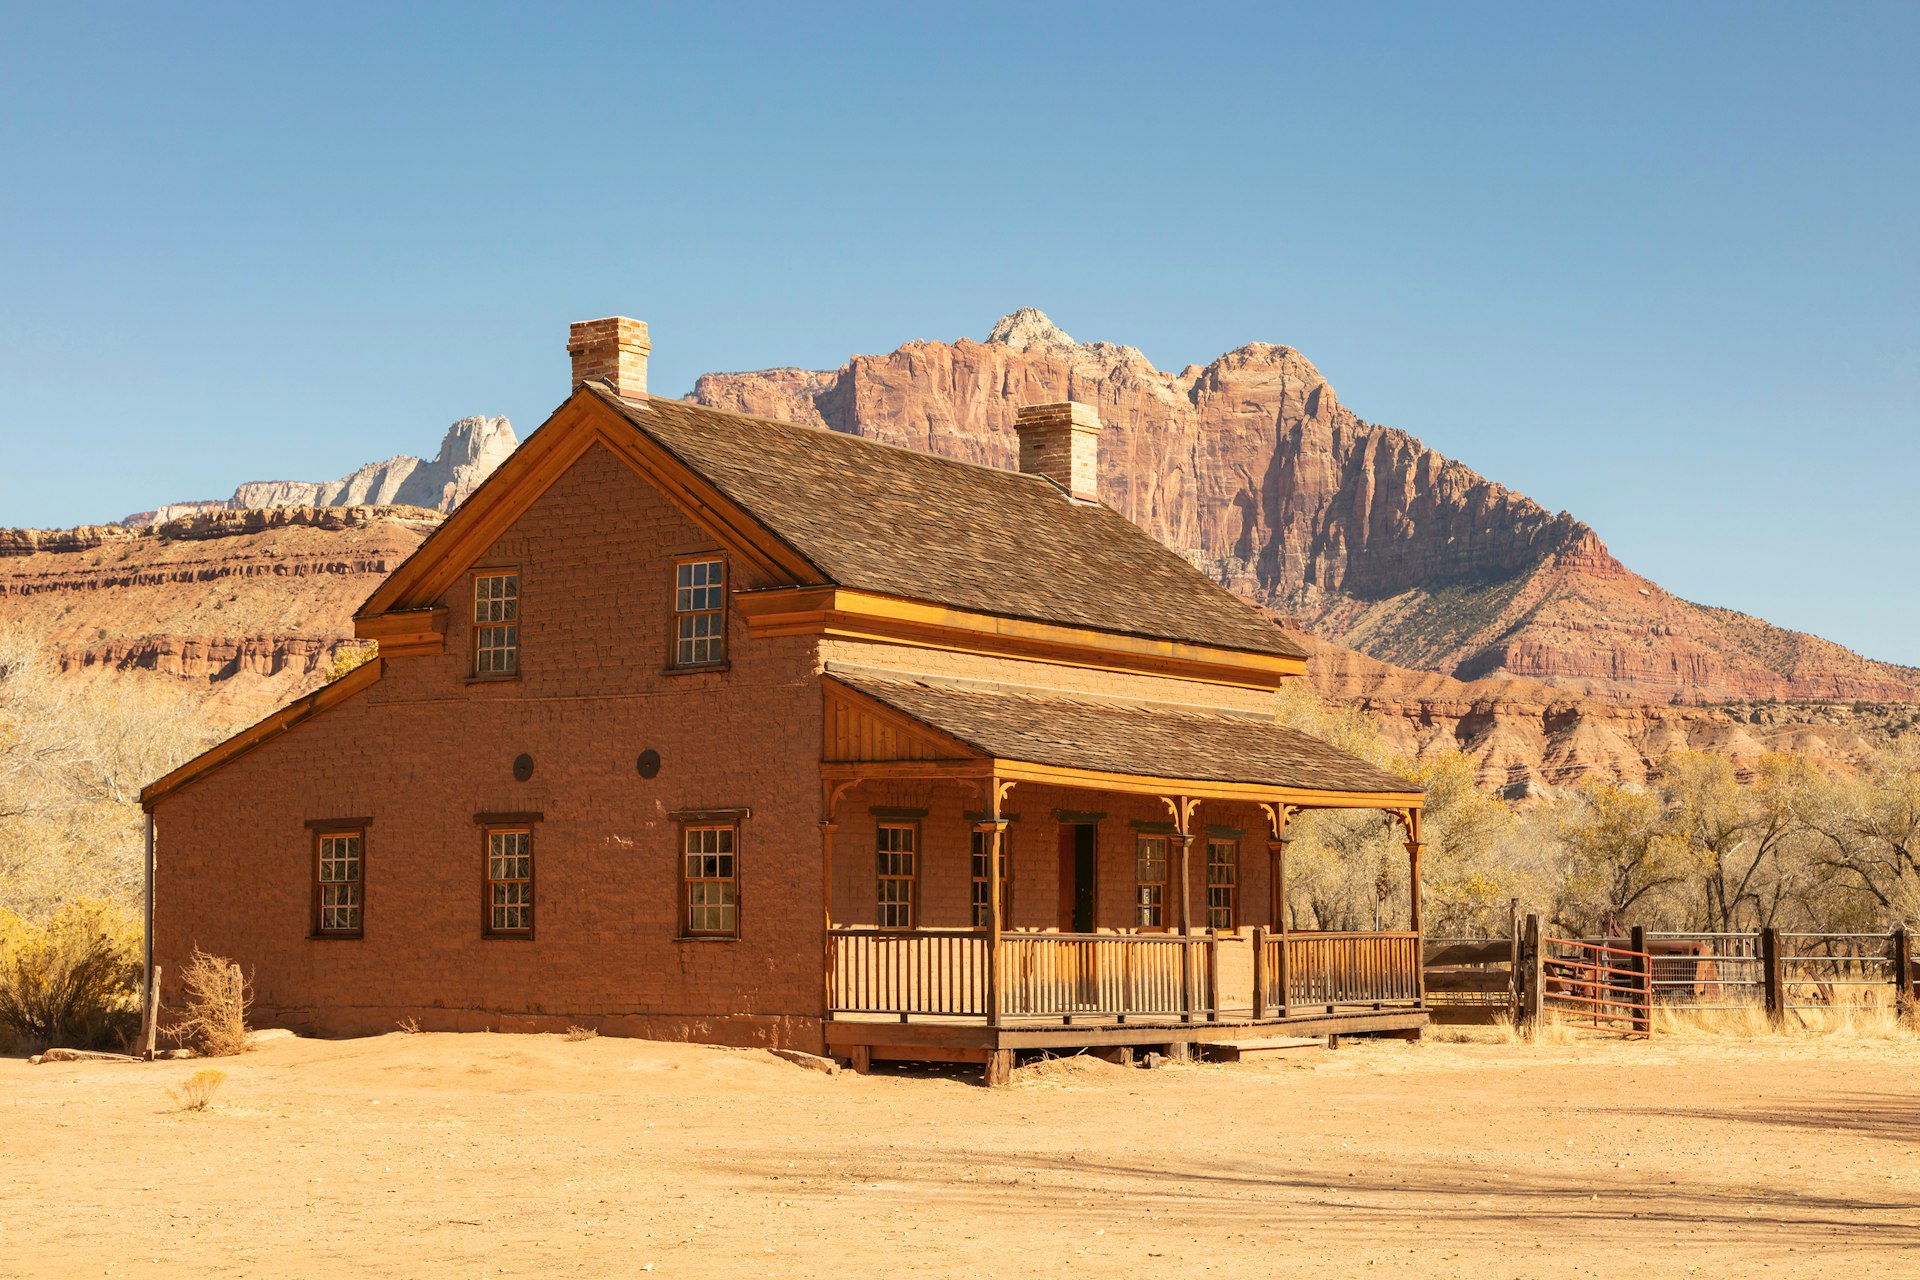 An abandoned house and picket fence against rock formations and a blue sky at Grafton ghost town, Utah